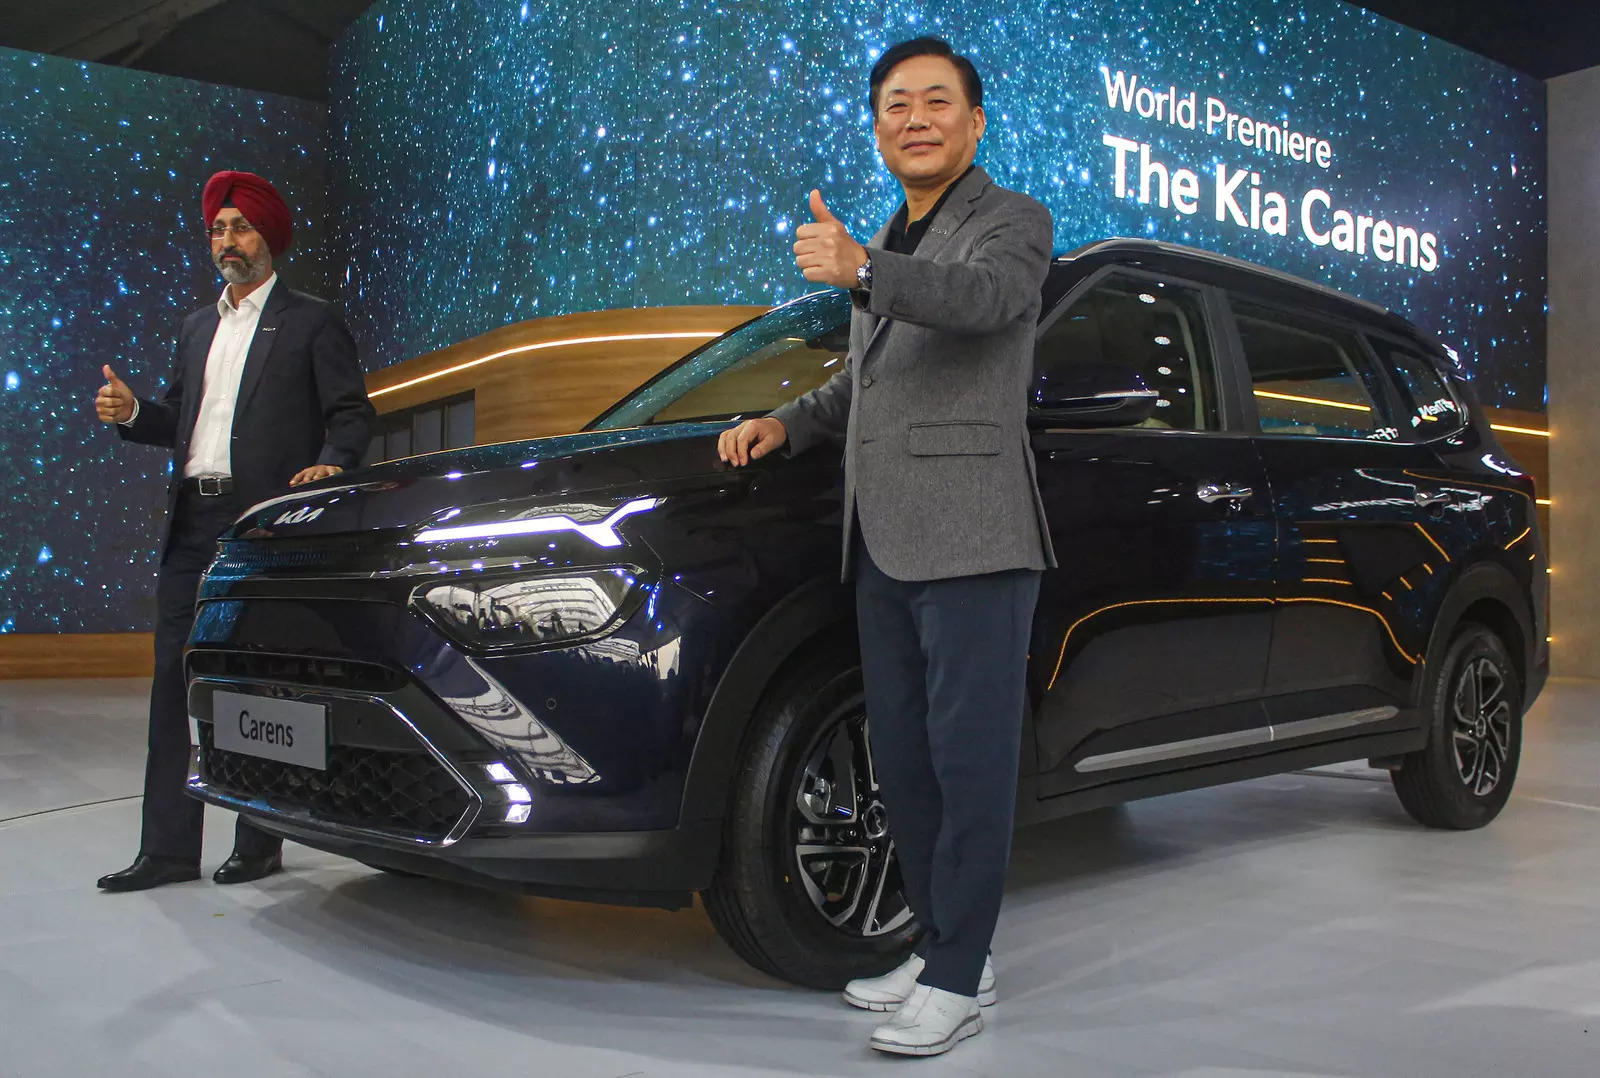  Gurugram: Kia India MD & CEO Tae- Jin Park and Vice President & Head of Marketing and Sales Hardeep S Brar at the world premiere of the Kia Carens, in Gurugram. 